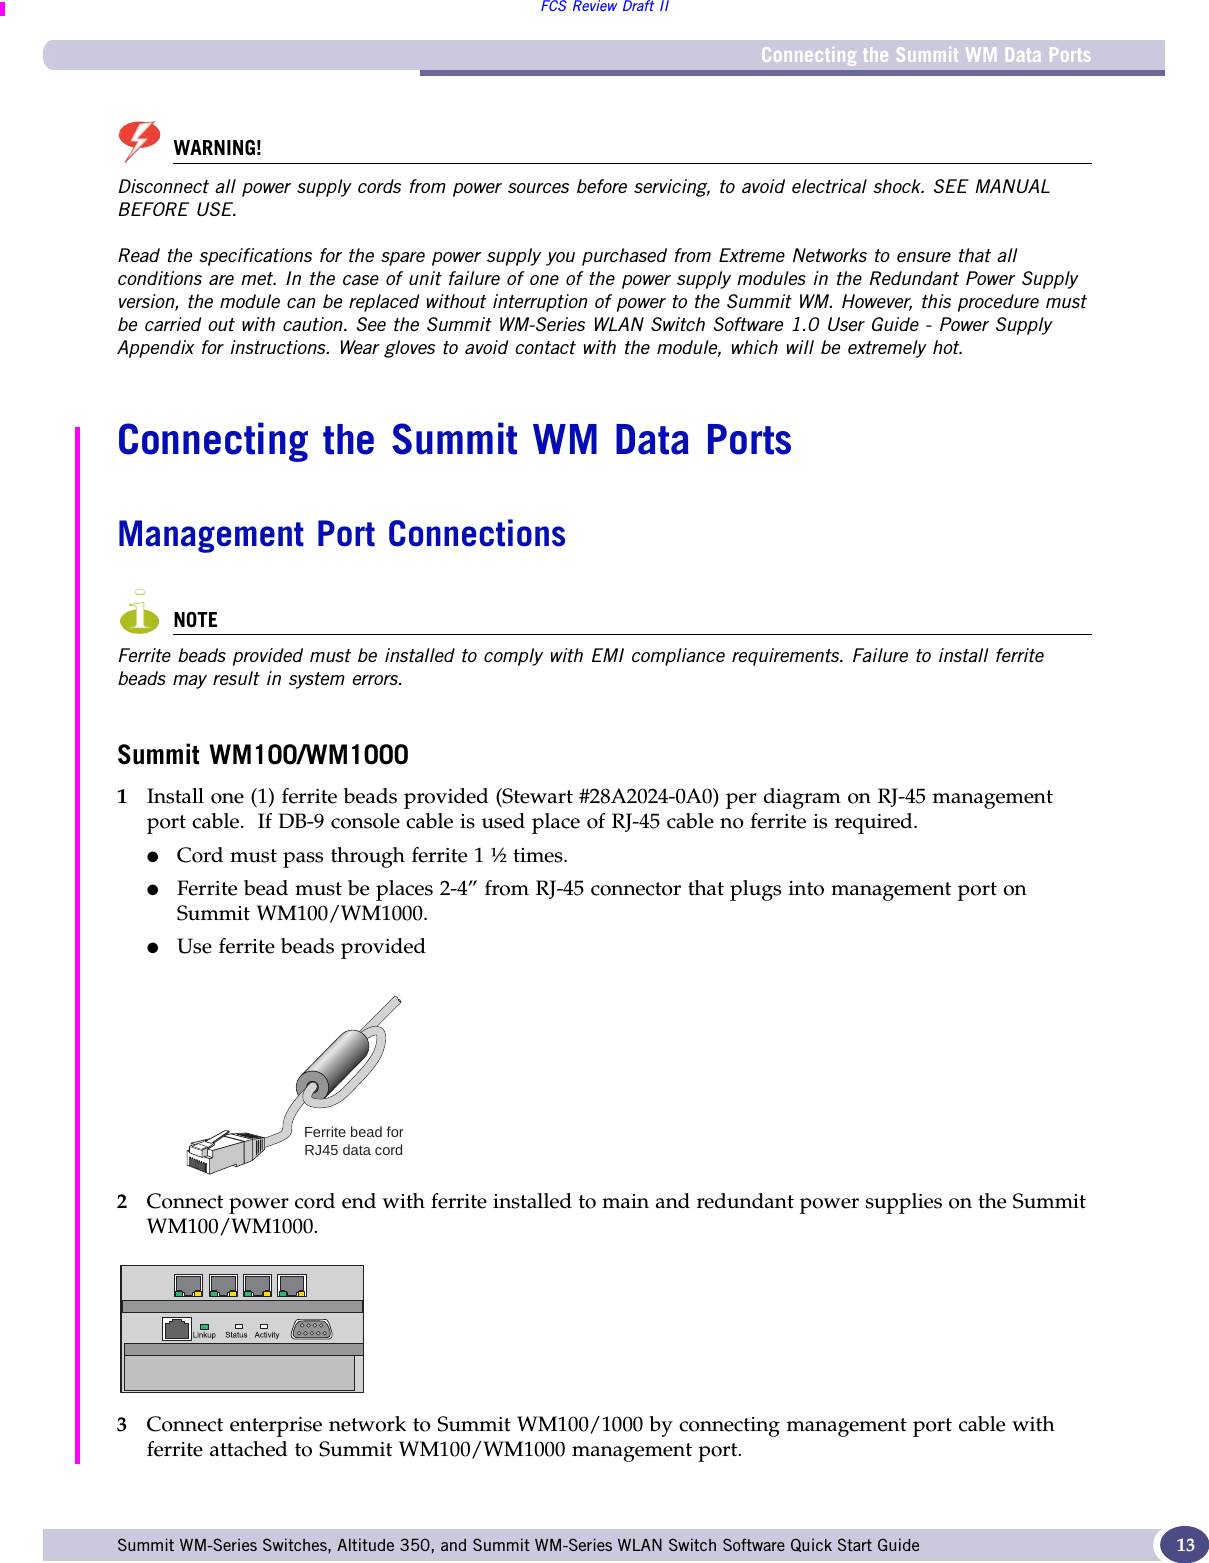 Connecting the Summit WM Data PortsFCS Review Draft IISummit WM-Series Switches, Altitude 350, and Summit WM-Series WLAN Switch Software Quick Start Guide  13WARNING!Disconnect all power supply cords from power sources before servicing, to avoid electrical shock. SEE MANUAL BEFORE USE.Read the specifications for the spare power supply you purchased from Extreme Networks to ensure that all conditions are met. In the case of unit failure of one of the power supply modules in the Redundant Power Supply version, the module can be replaced without interruption of power to the Summit WM. However, this procedure must be carried out with caution. See the Summit WM-Series WLAN Switch Software 1.0 User Guide - Power Supply Appendix for instructions. Wear gloves to avoid contact with the module, which will be extremely hot.Connecting the Summit WM Data PortsManagement Port ConnectionsNOTEFerrite beads provided must be installed to comply with EMI compliance requirements. Failure to install ferrite beads may result in system errors.Summit WM100/WM10001Install one (1) ferrite beads provided (Stewart #28A2024-0A0) per diagram on RJ-45 management port cable.  If DB-9 console cable is used place of RJ-45 cable no ferrite is required.●Cord must pass through ferrite 1 ½ times.●Ferrite bead must be places 2-4” from RJ-45 connector that plugs into management port on Summit WM100/WM1000.●Use ferrite beads provided 2Connect power cord end with ferrite installed to main and redundant power supplies on the Summit WM100/WM1000.3Connect enterprise network to Summit WM100/1000 by connecting management port cable with ferrite attached to Summit WM100/WM1000 management port.  Ferrite bead forRJ45 data cord